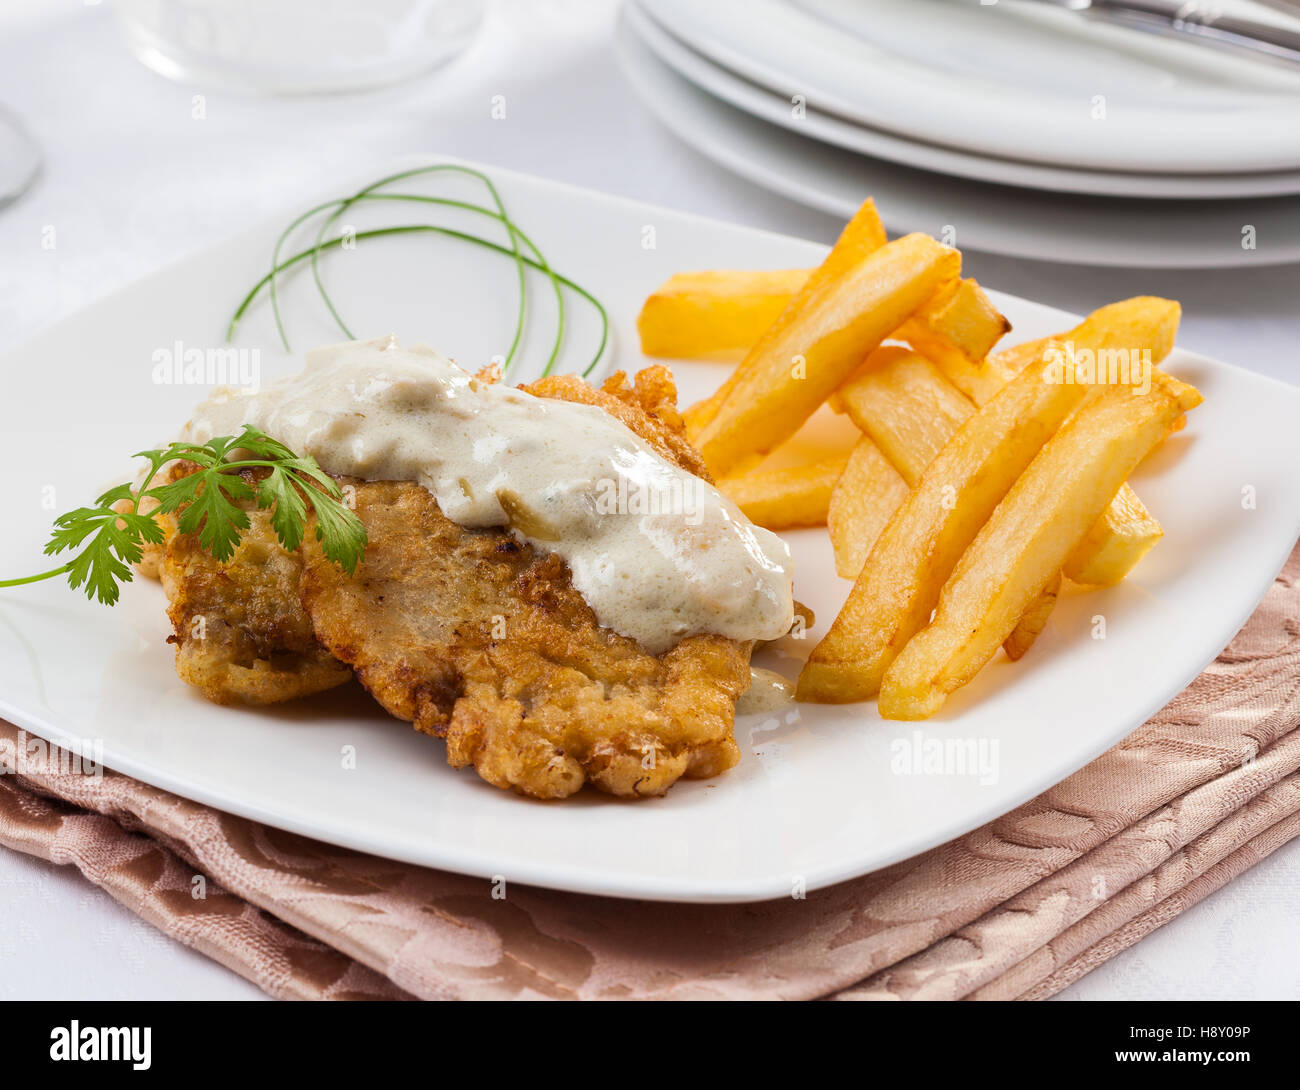 Breaded cutlet with blue cheese sauce and fried potatoes. Stock Photo